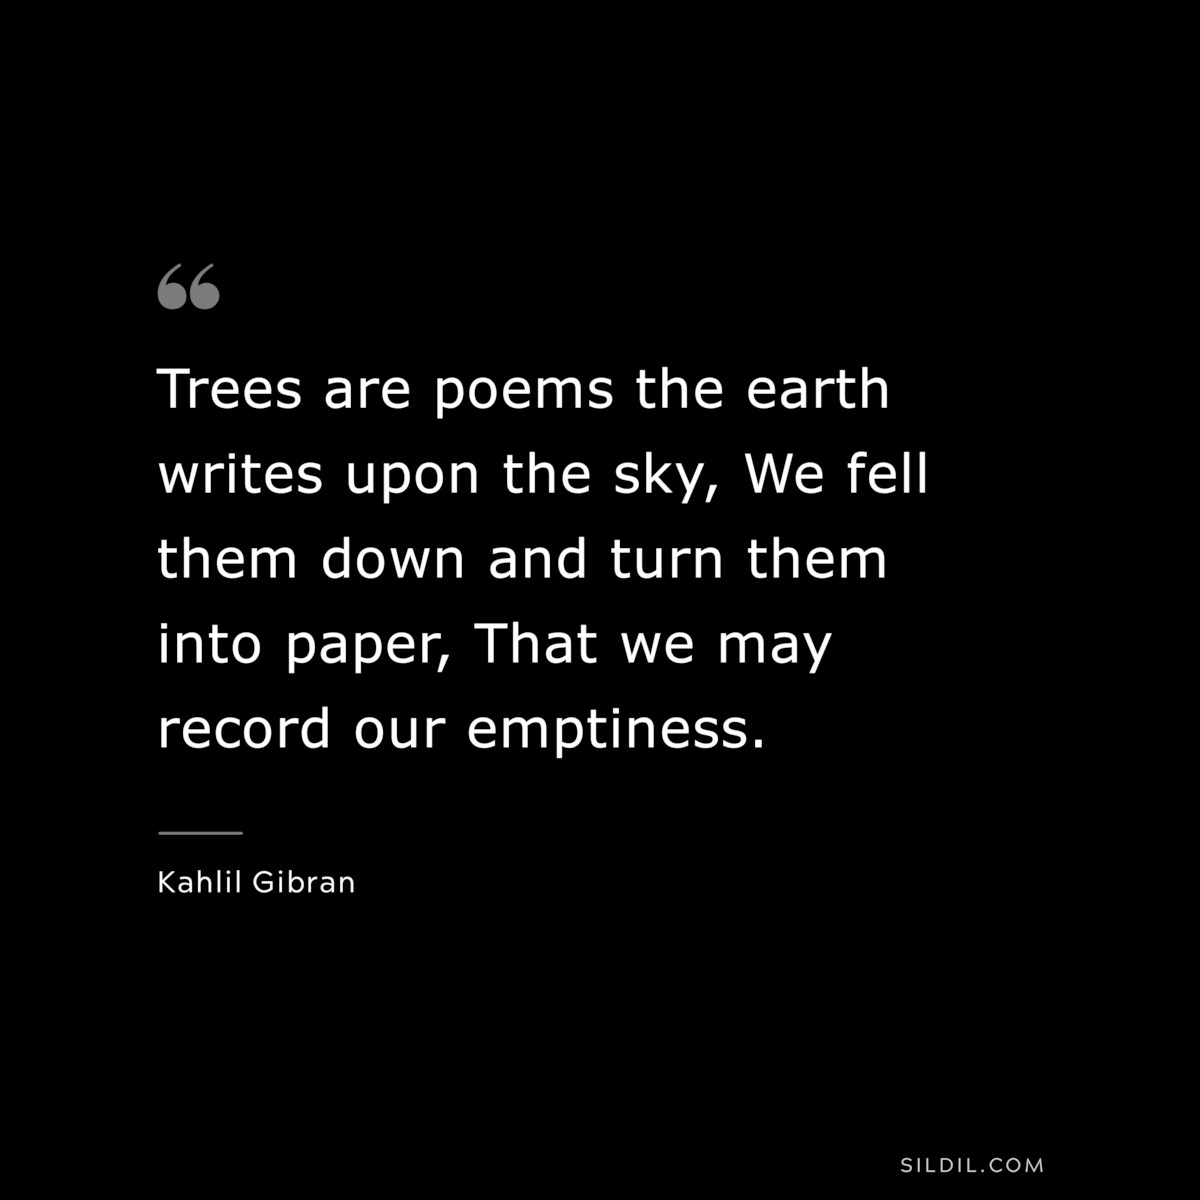 Trees are poems the earth writes upon the sky, We fell them down and turn them into paper, That we may record our emptiness. ― Kahlil Gibran